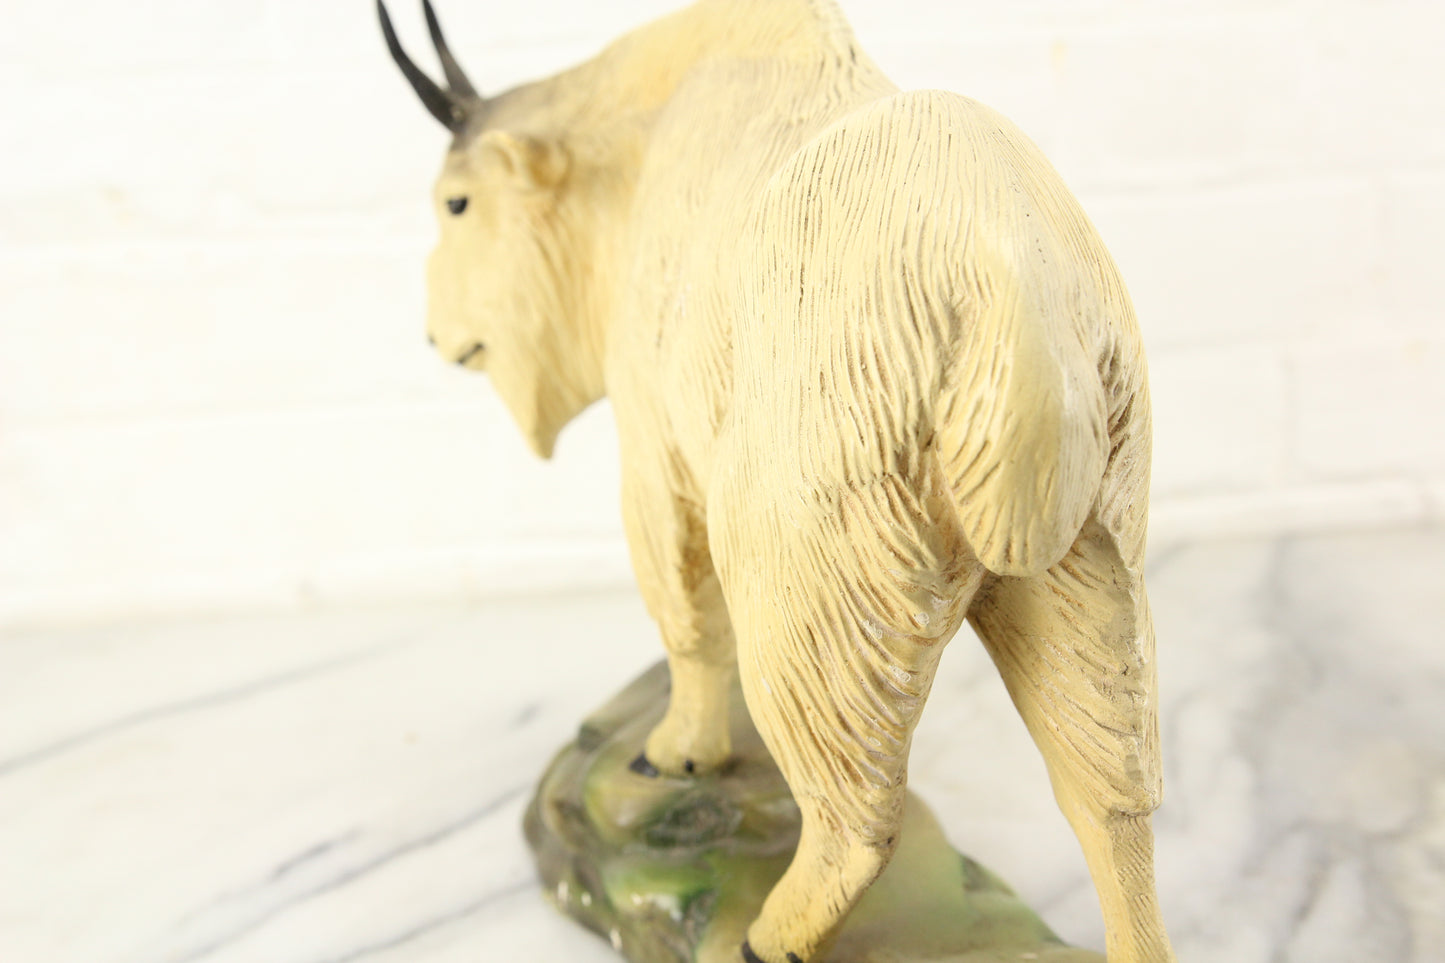 Chalkware Rocky Mountain Goat Statue, An Orn-A-Craft Product, 1947